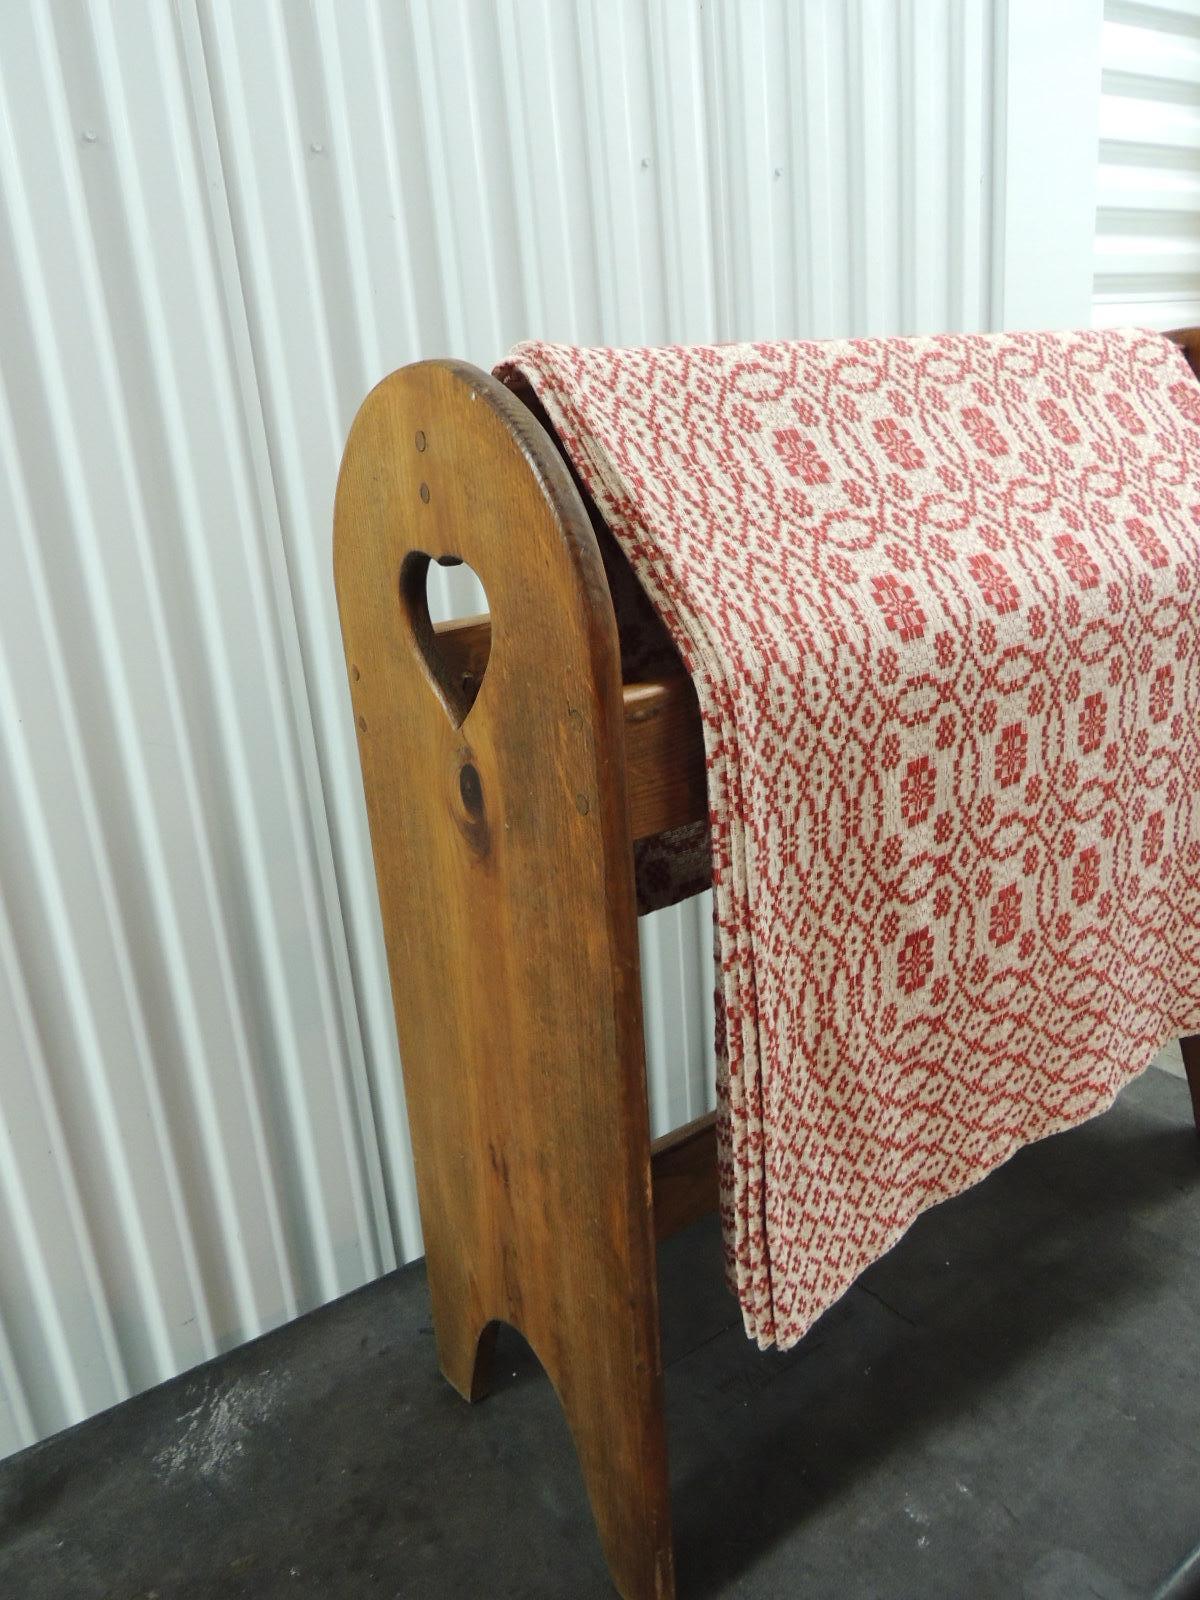 Red and White Americana Jacquard Woven Blanket/Coverlet 1